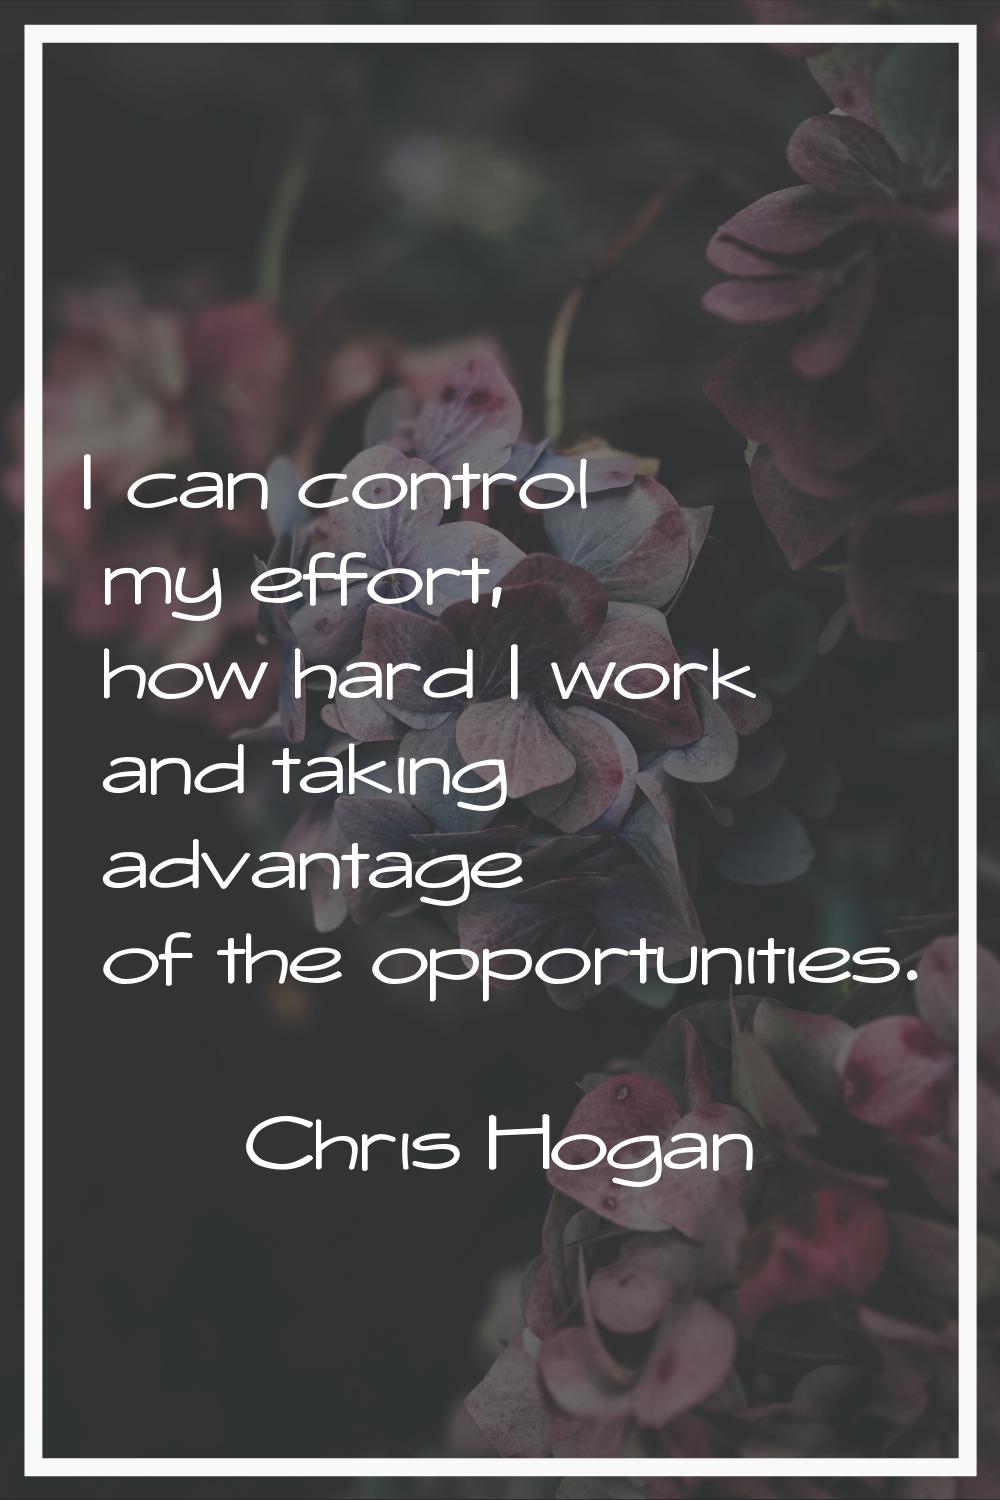 I can control my effort, how hard I work and taking advantage of the opportunities.